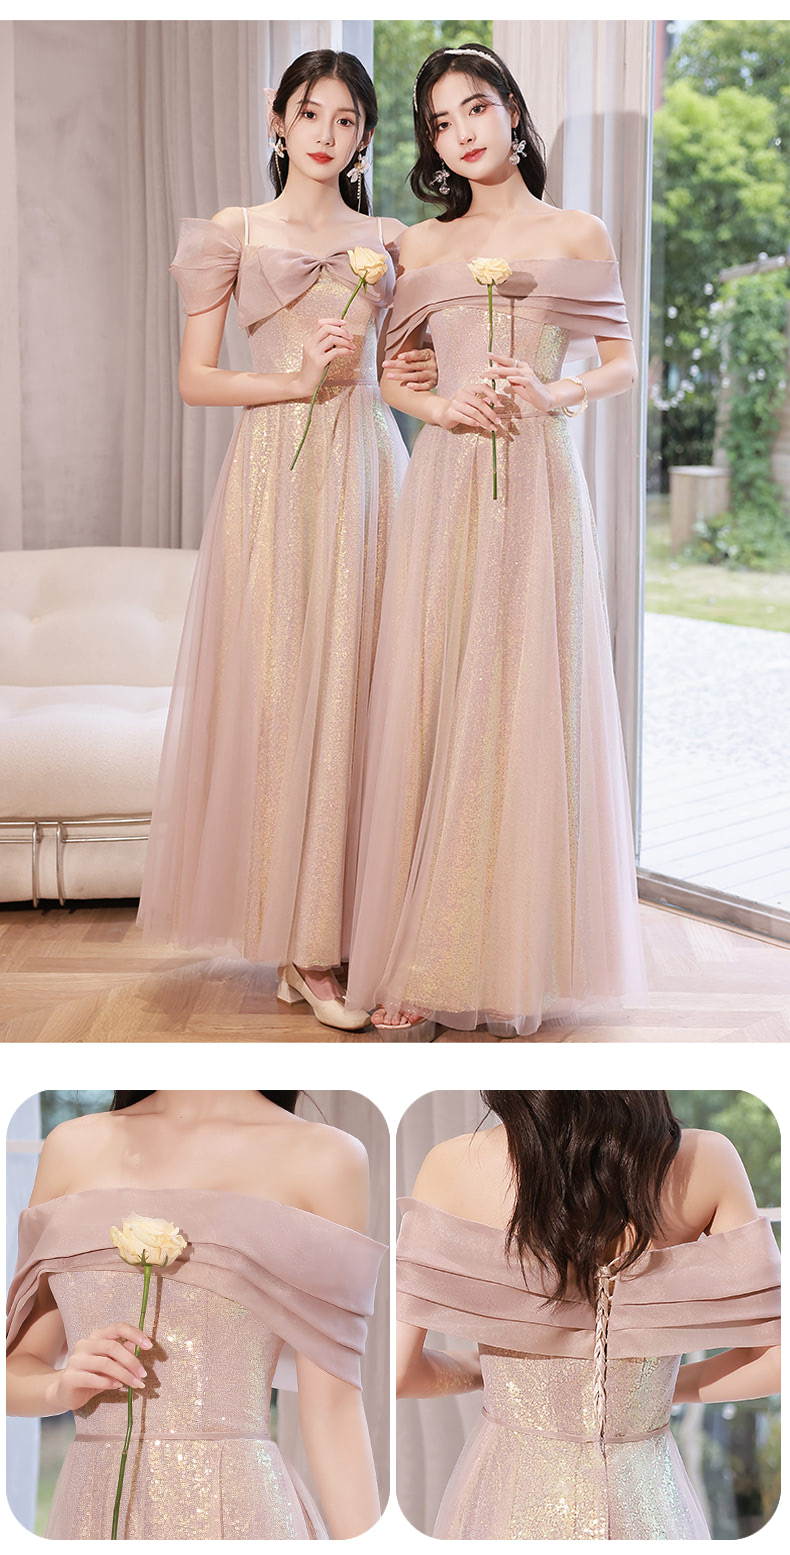 Fairy-Starry-Pink-Slim-Bridesmaid-Long-Dress-Wedding-Party-Gown21.jpg